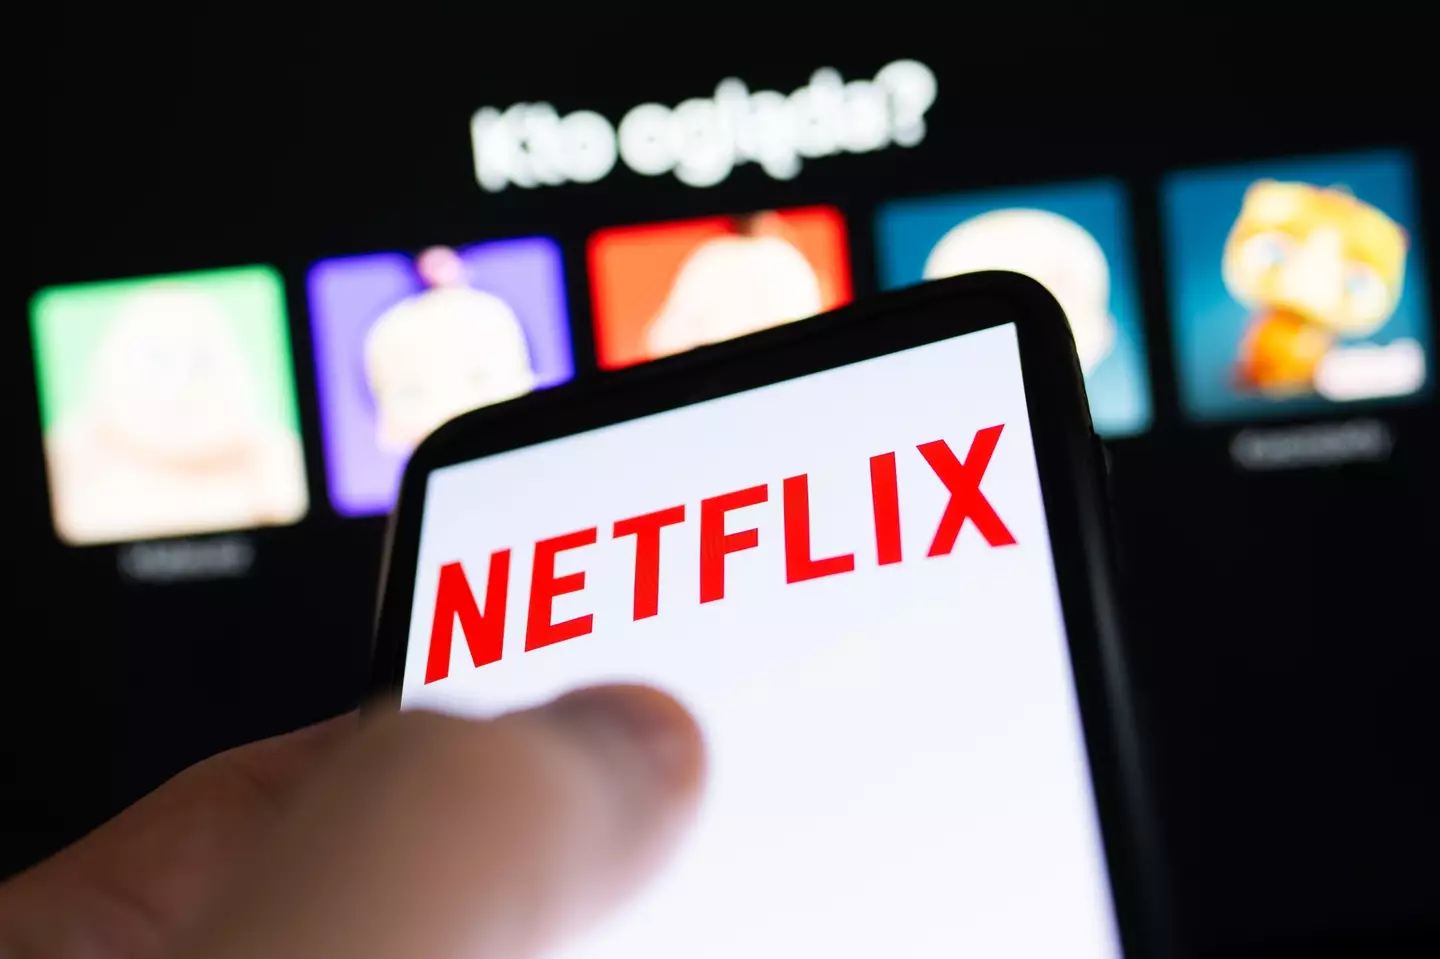 Netflix can no longer be paid for via Apple.